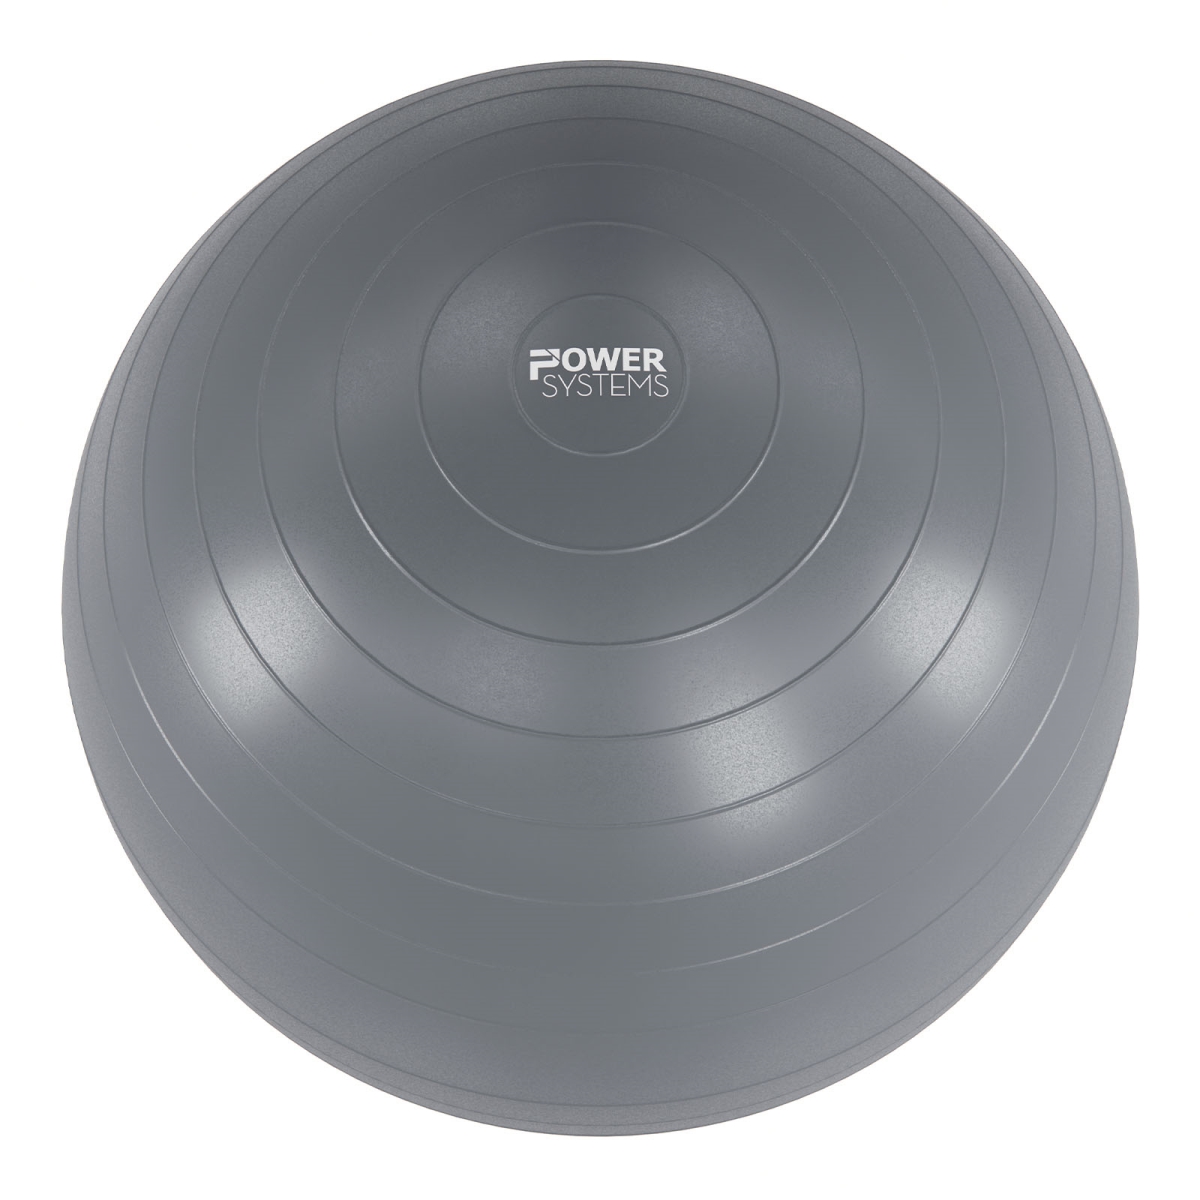 Picture of Power Systems 80752 VersaBall Pro 55cm - Gray